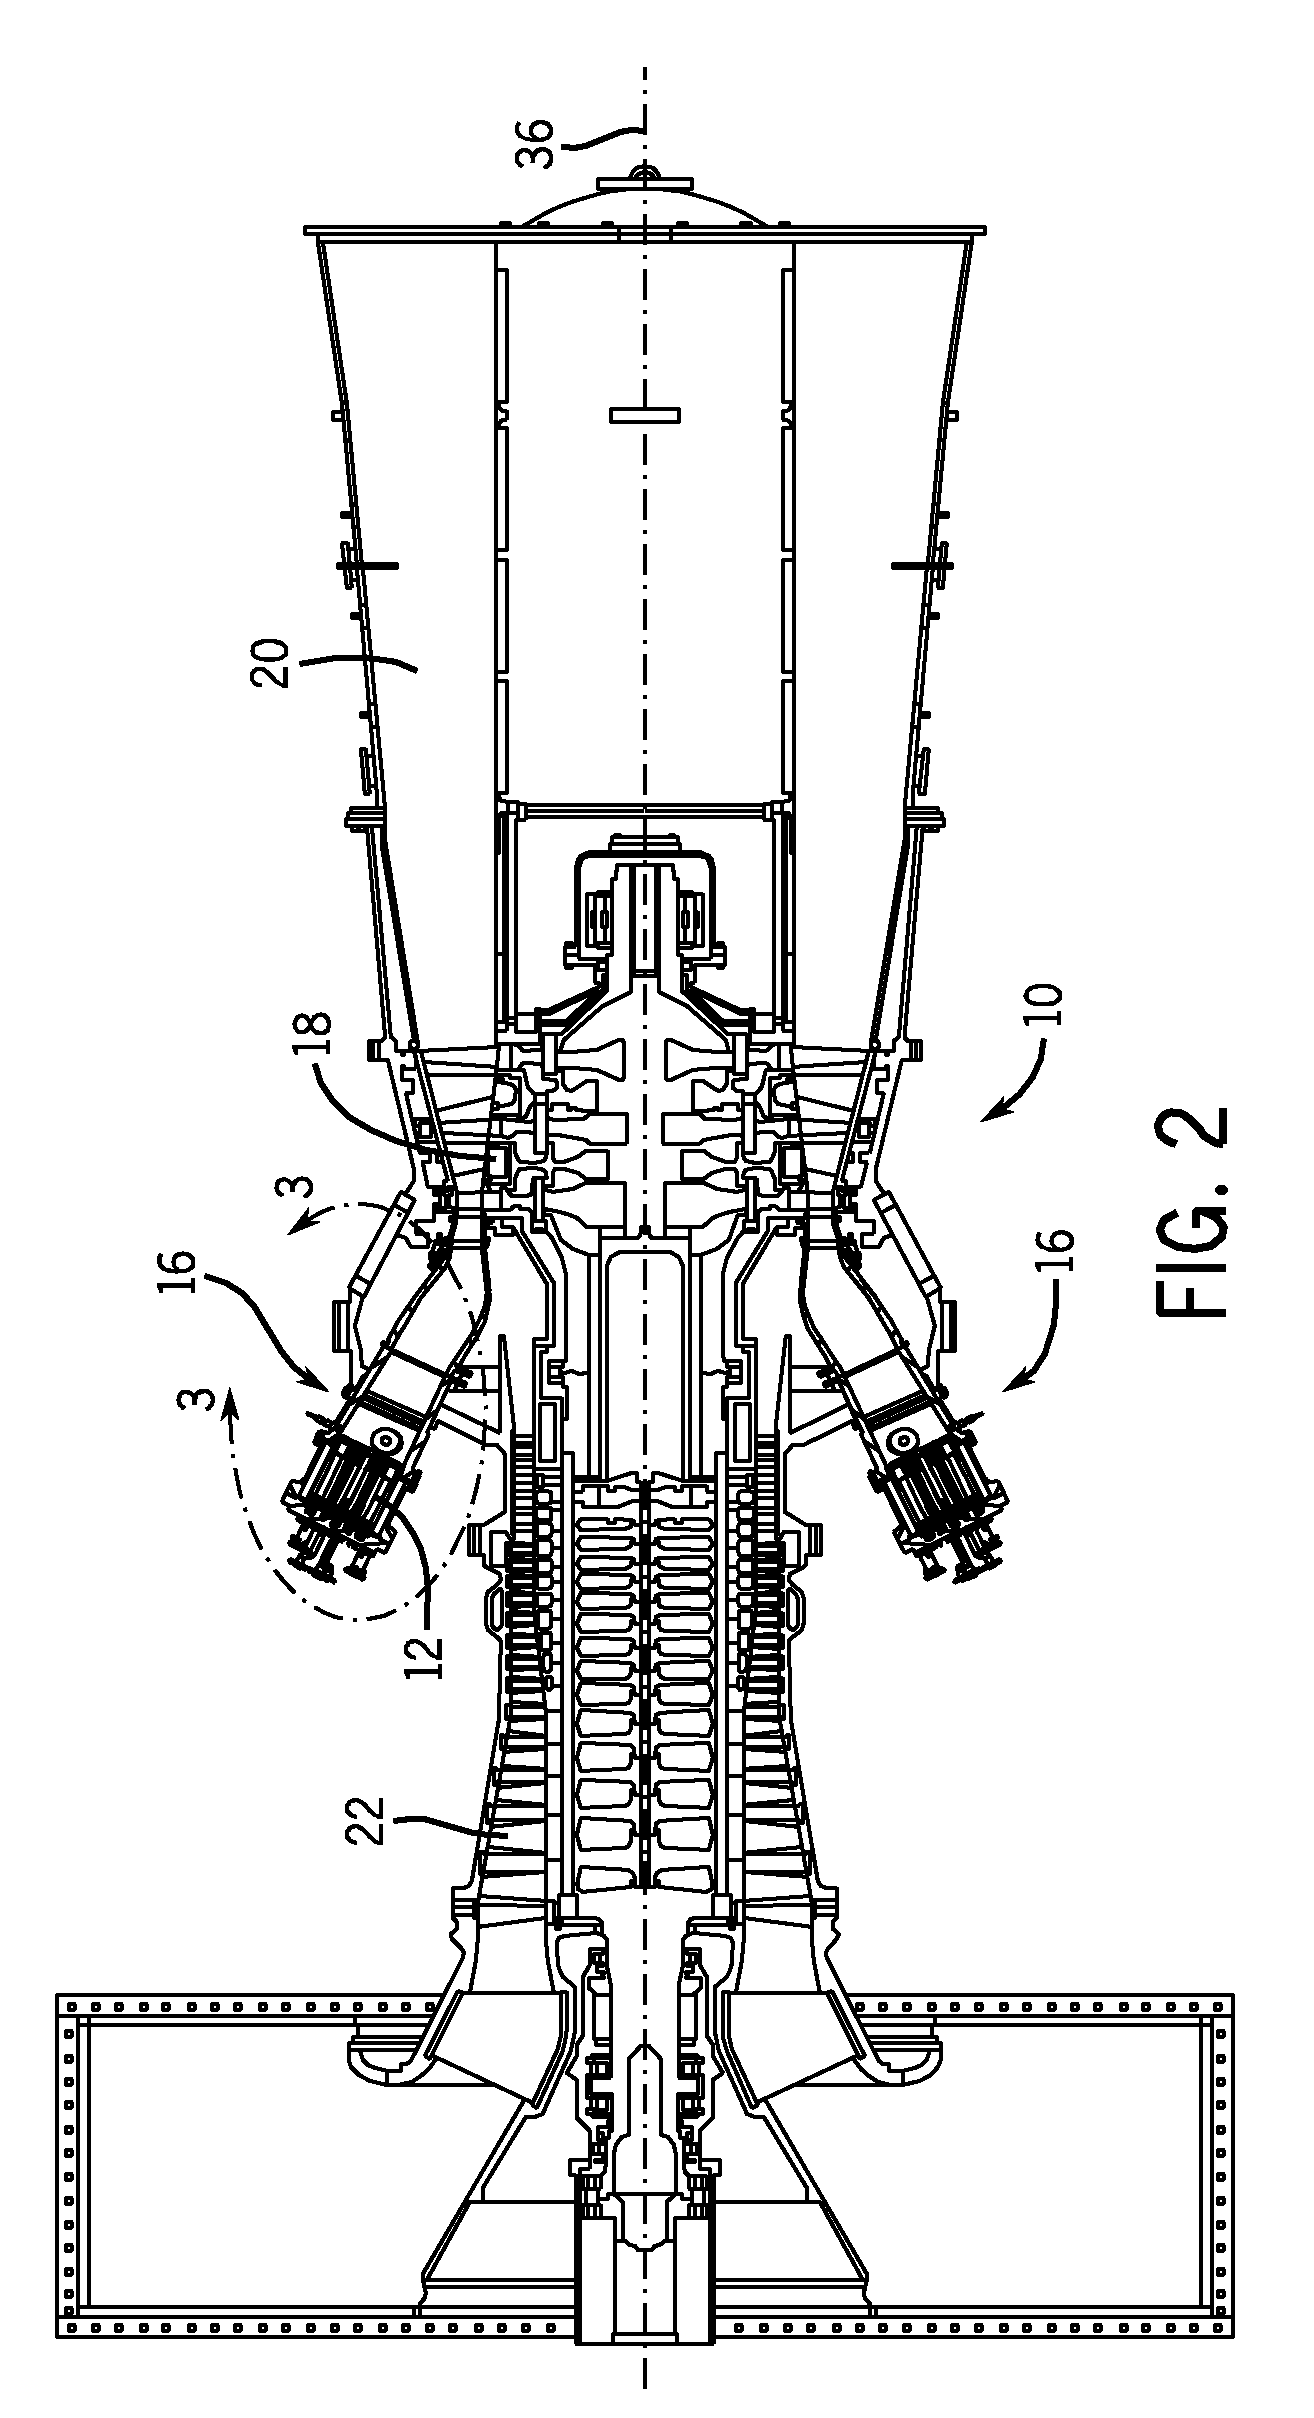 Apparatus for fuel injection in a turbine engine